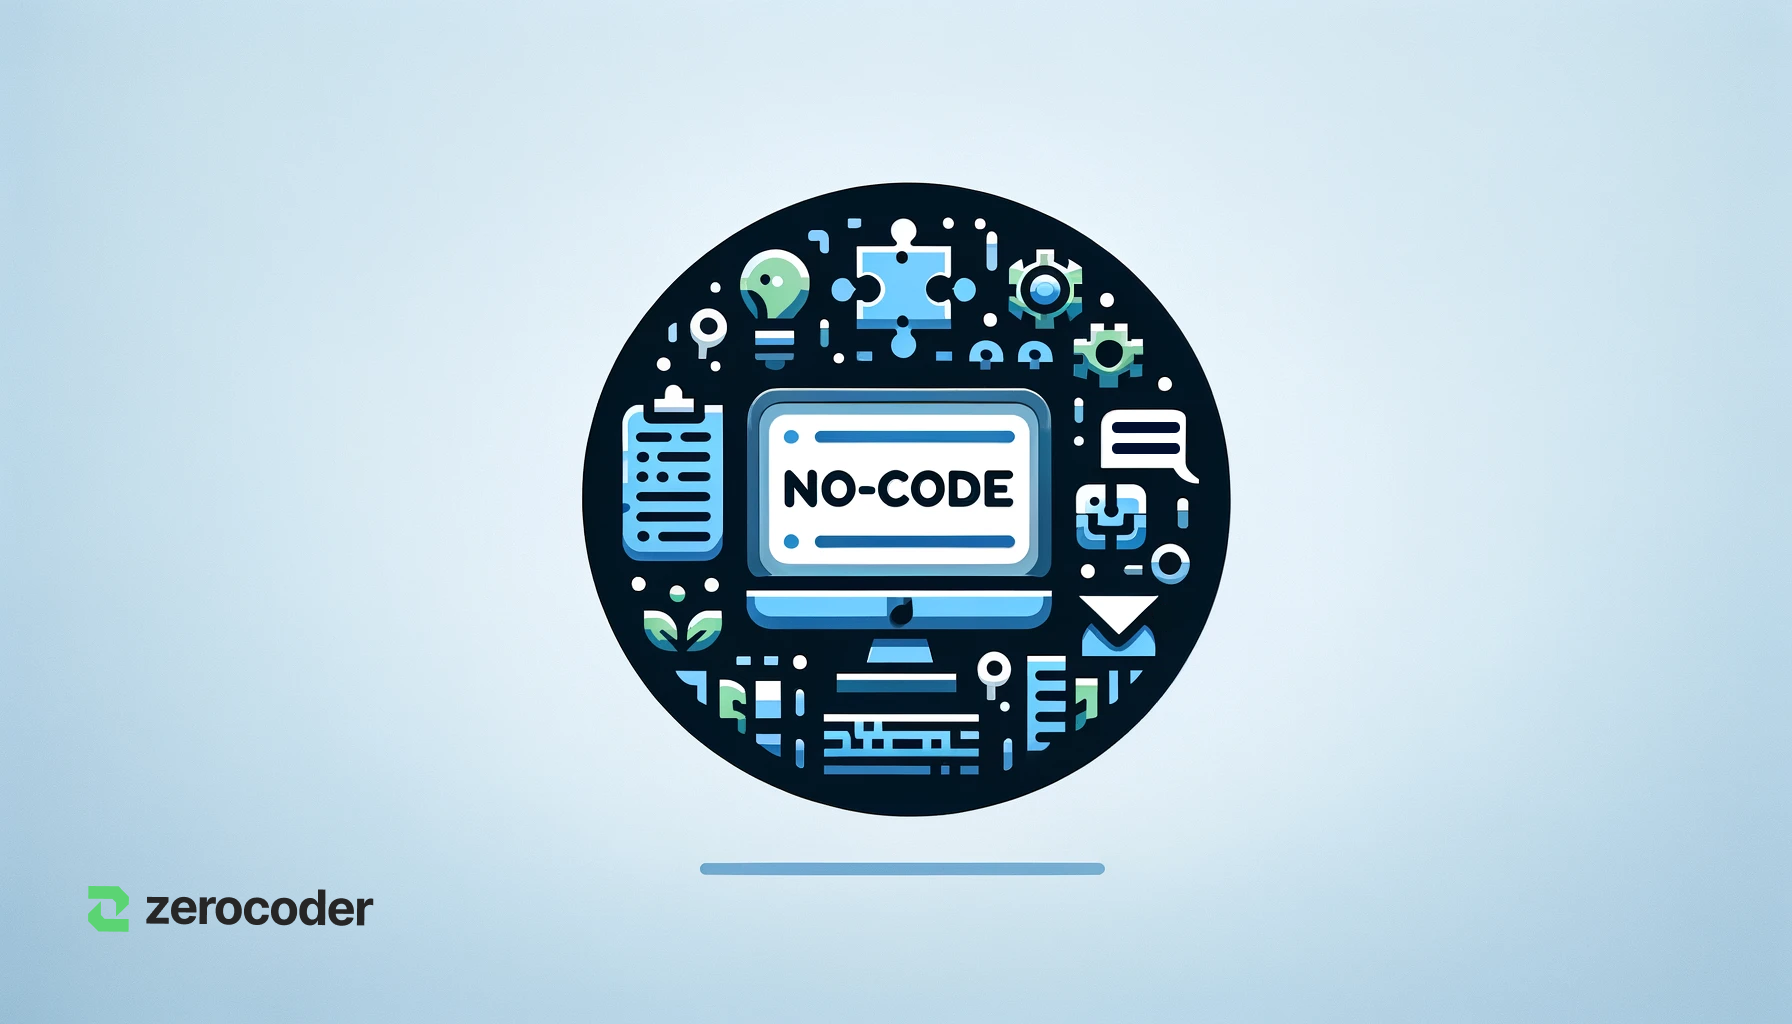 Benefits of No-Code for Developers